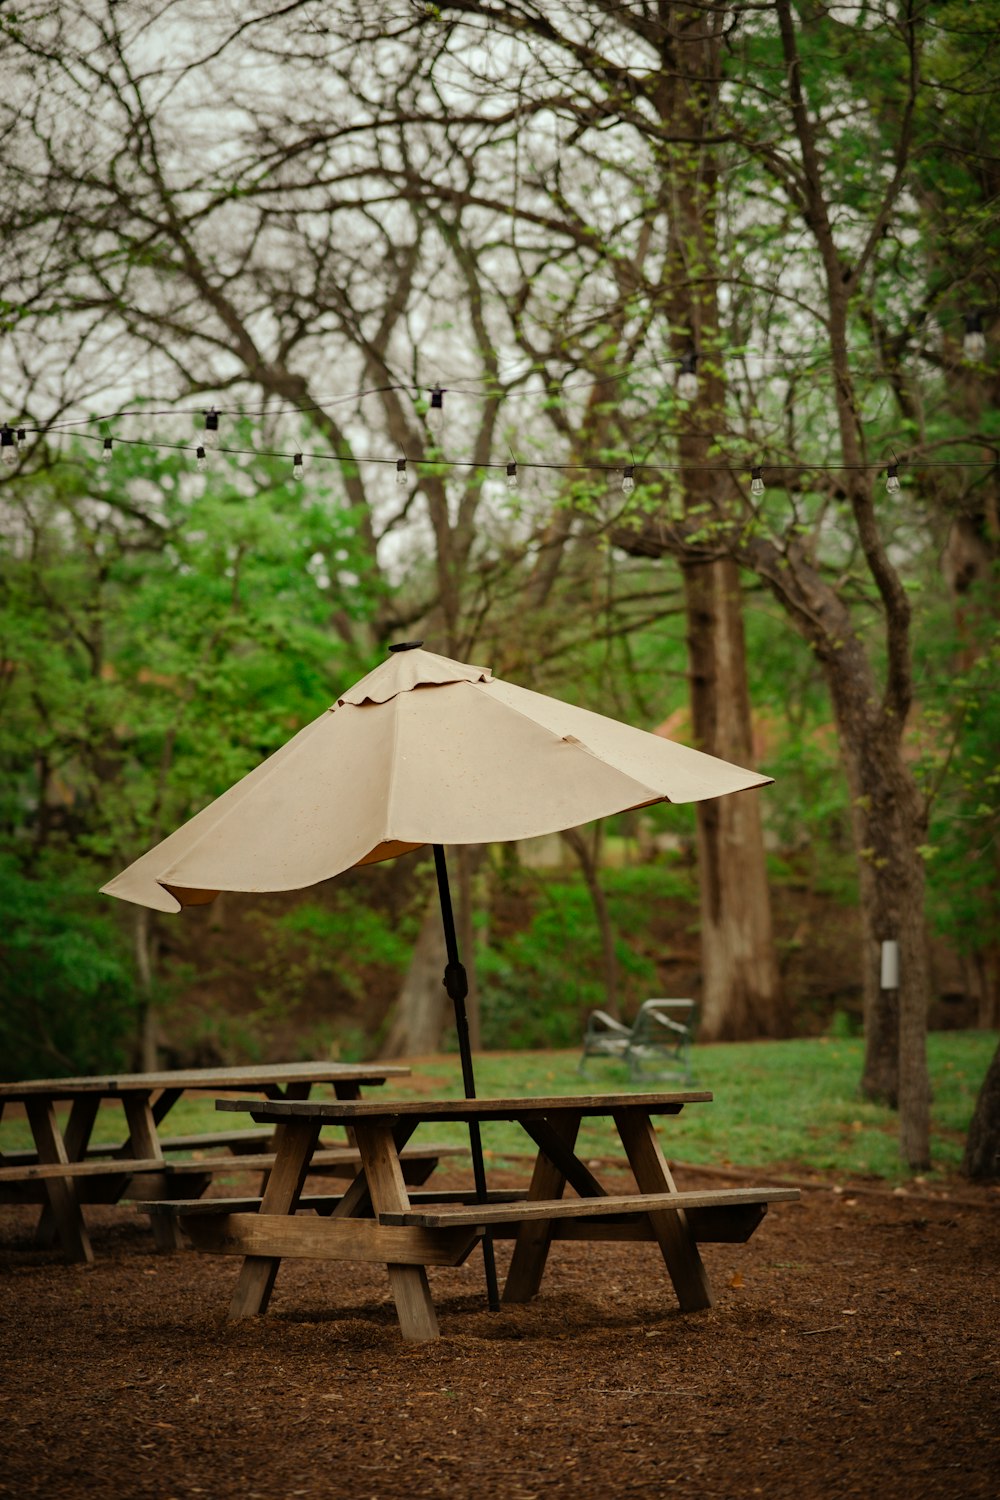 a picnic table with an umbrella in a park